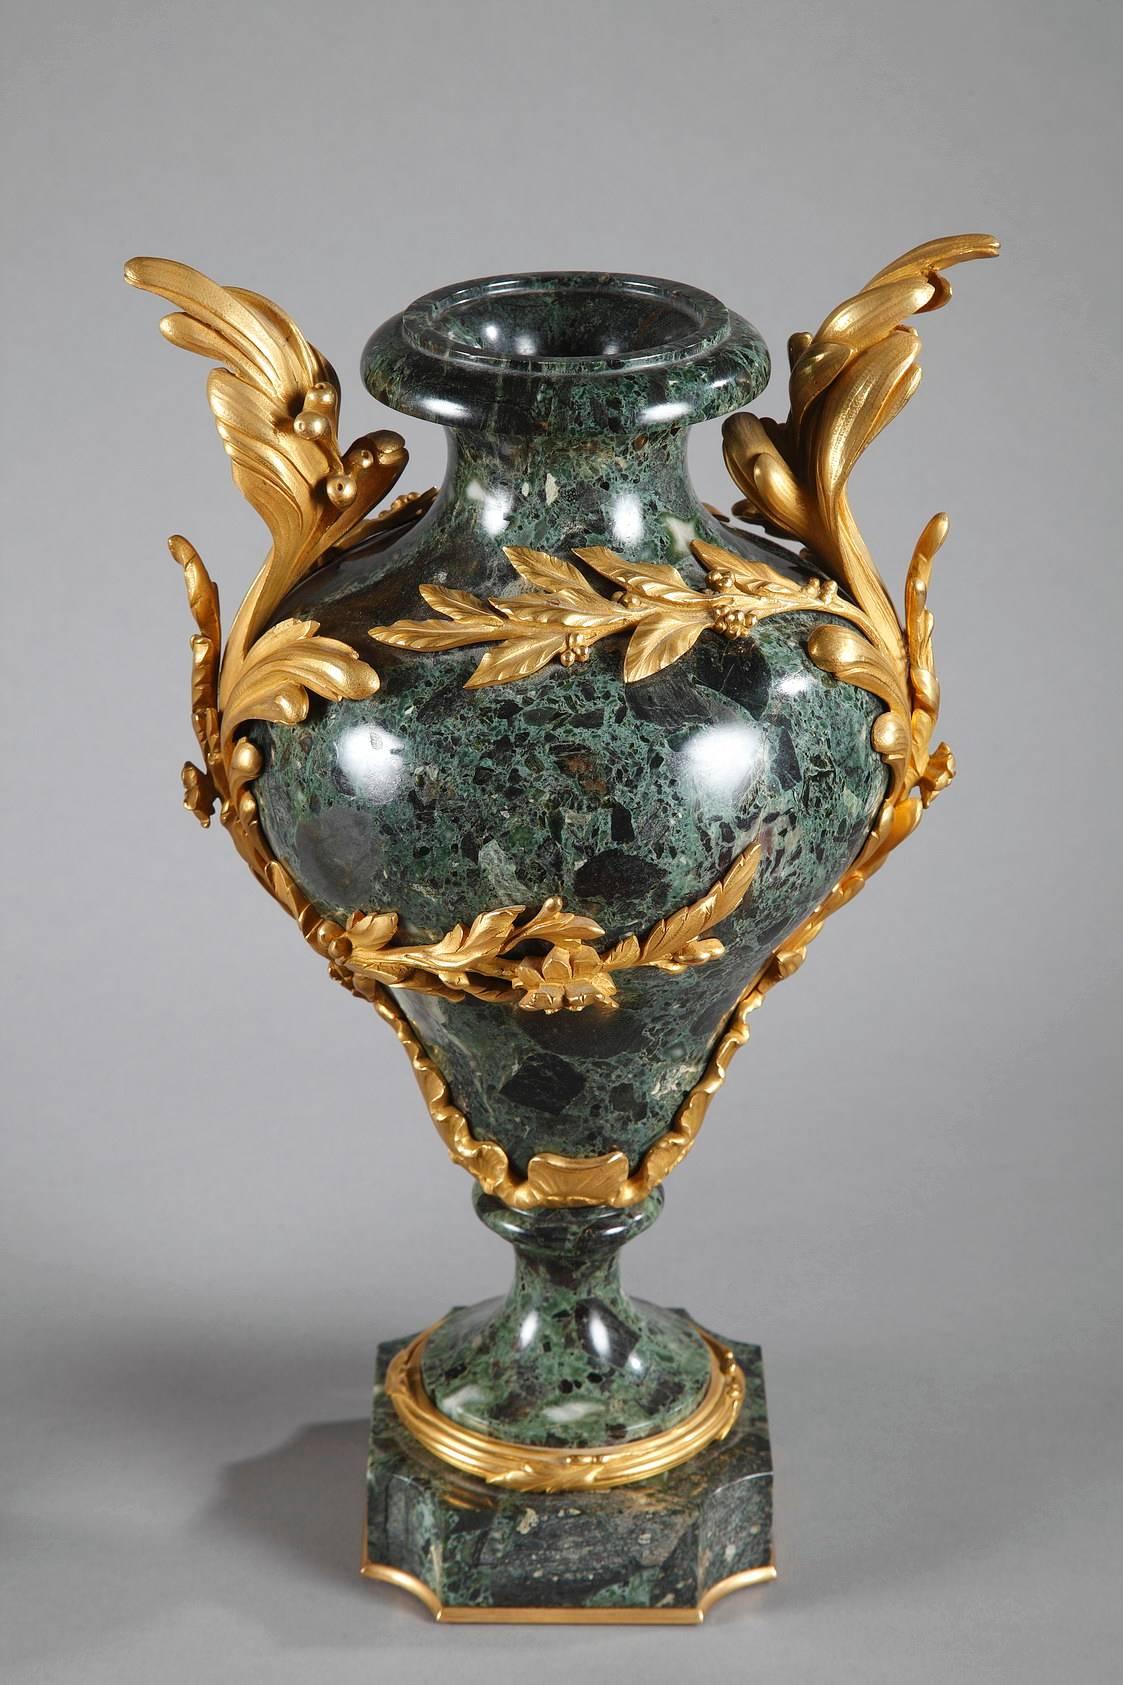 Pair of green marble “vert de mer” baluster-shaped vases. They are richly decorated with gilt bronze Louis XV-style Rocaille, foliage, flowers, and seeds that wind up around the paunch of the marble vases and extend out to form handles. Each vase is